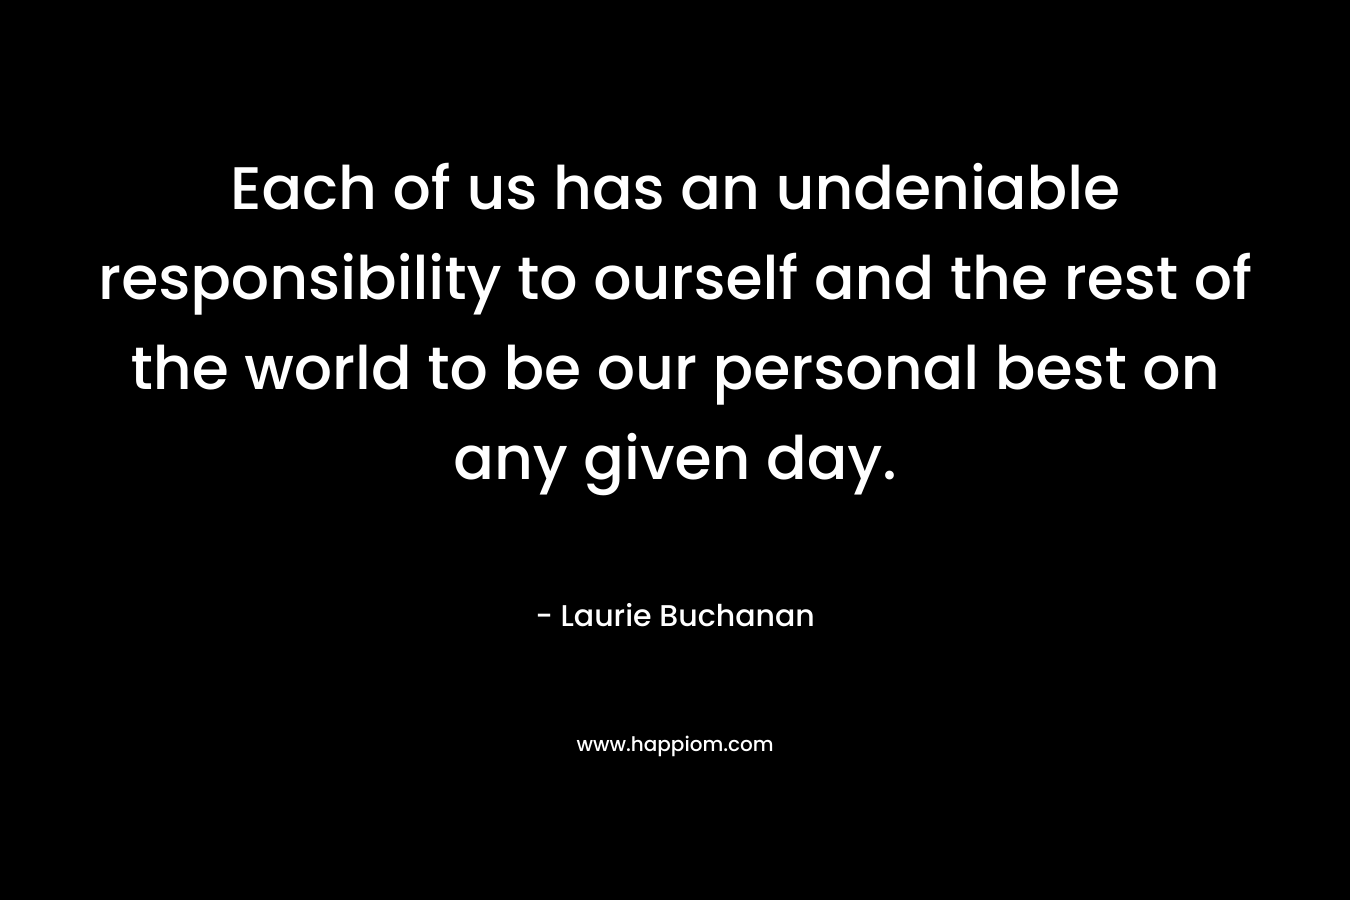 Each of us has an undeniable responsibility to ourself and the rest of the world to be our personal best on any given day. – Laurie Buchanan